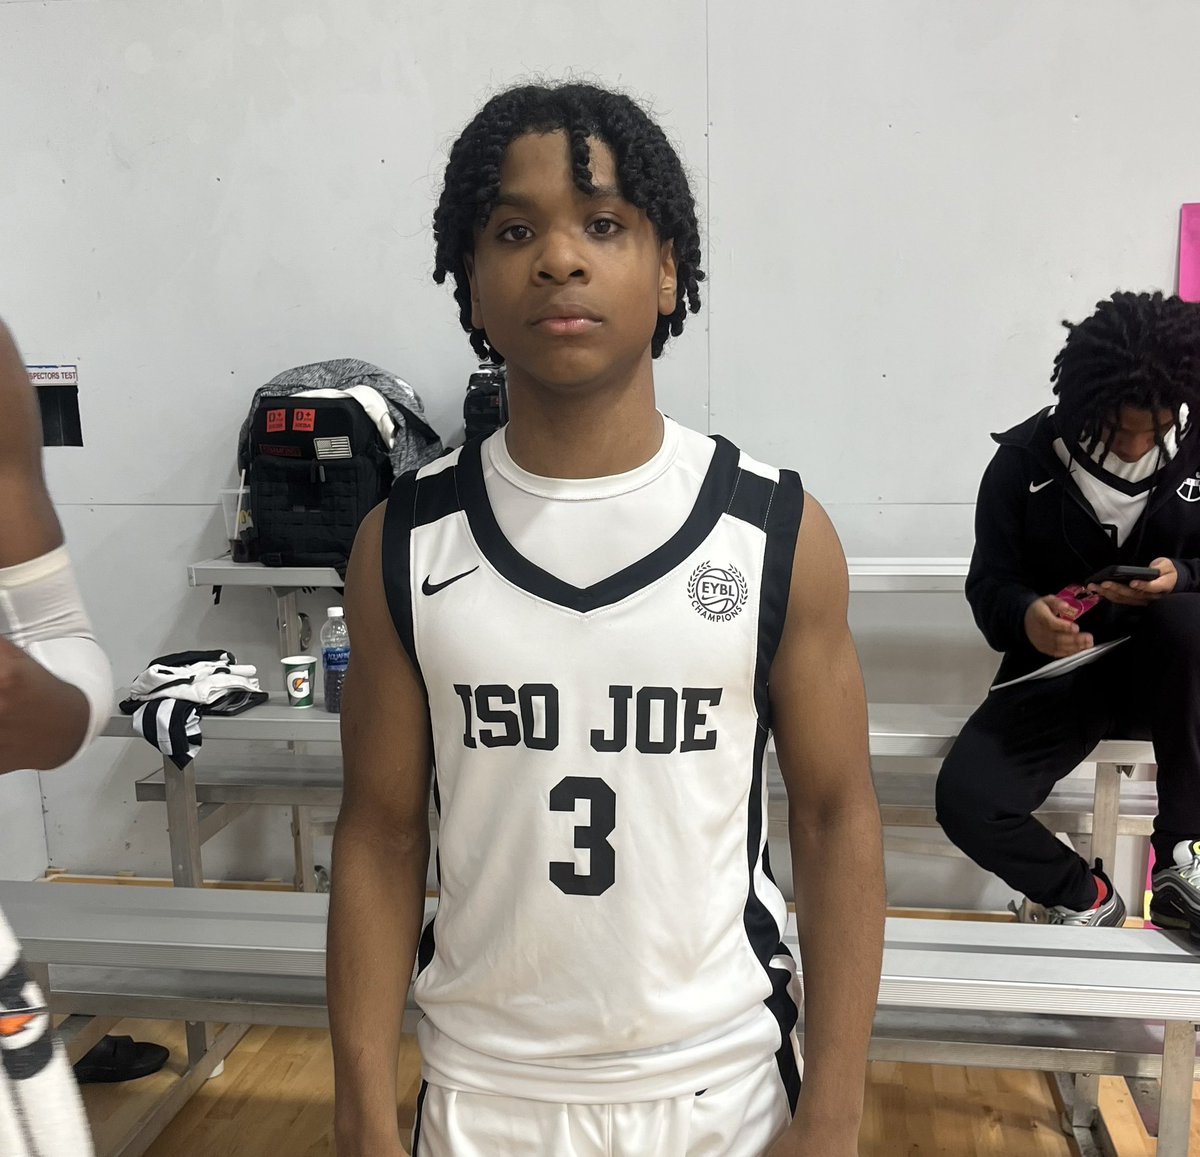 EYBL Session 1 📝’s: ISO Joe’s Micah Moore’s ability to generate cannot be understated. He initiates so many high % looks for his team by getting into the paint, changing sides of the floor in transition, and making reads out of BSs. Micah lived comfortably amongst the trees.